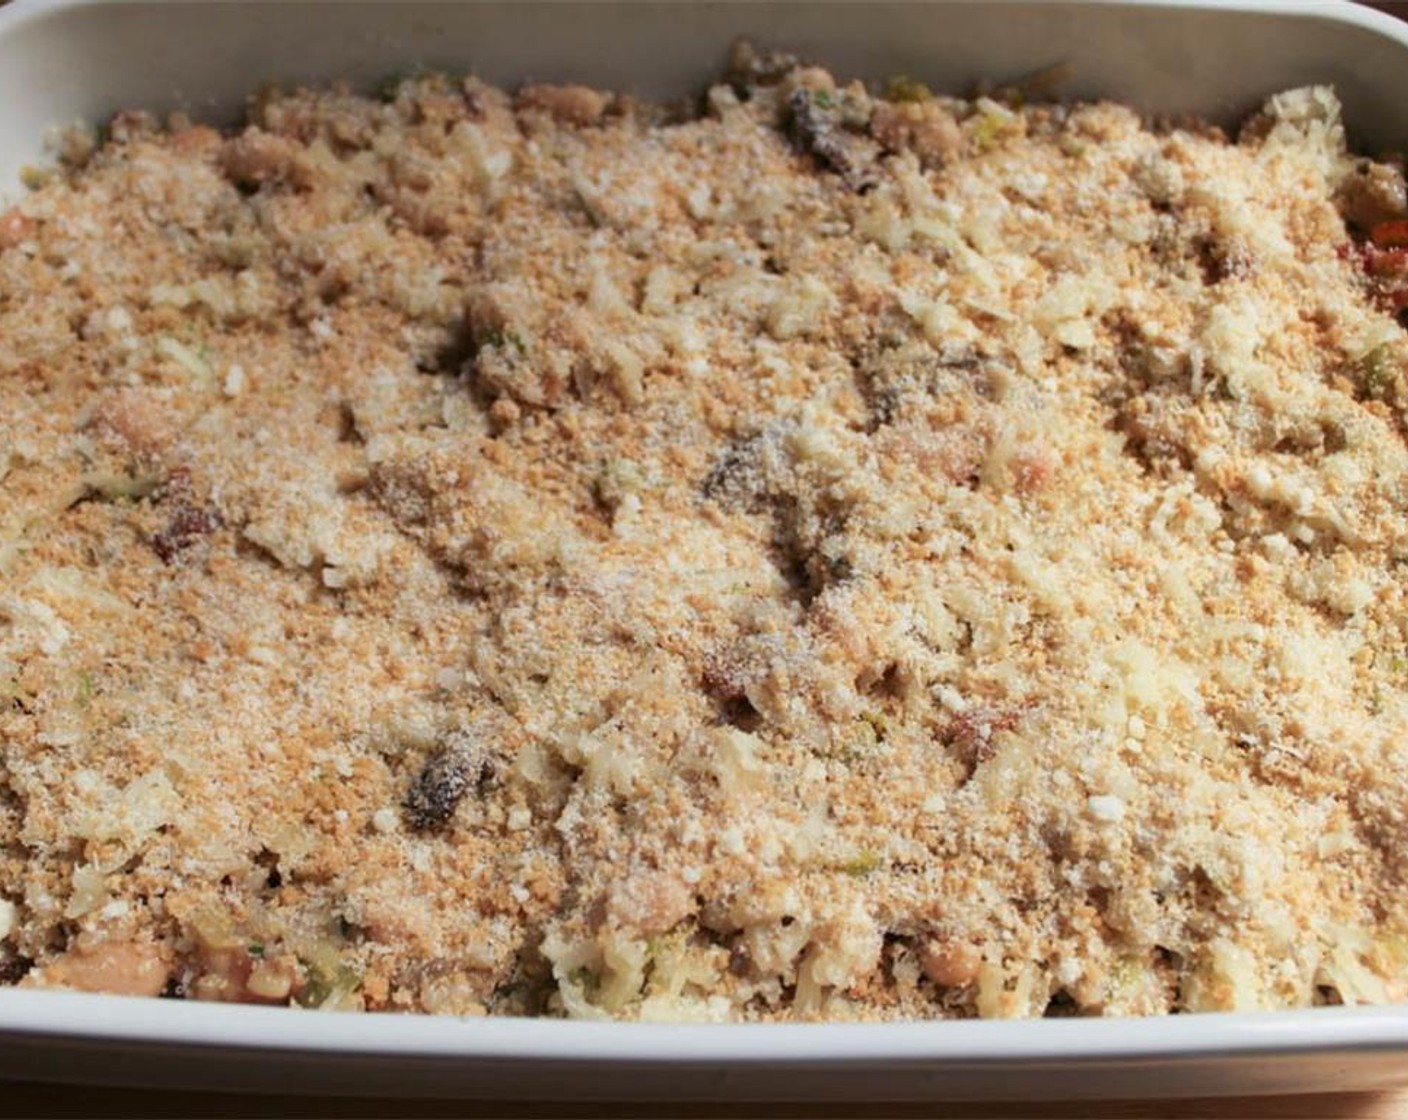 step 16 In a small bowl, combine the Whole Wheat Panko Breadcrumbs (1/4 cup) and Parmesan Cheese. Sprinkle the mixture in an even layer over the casserole.